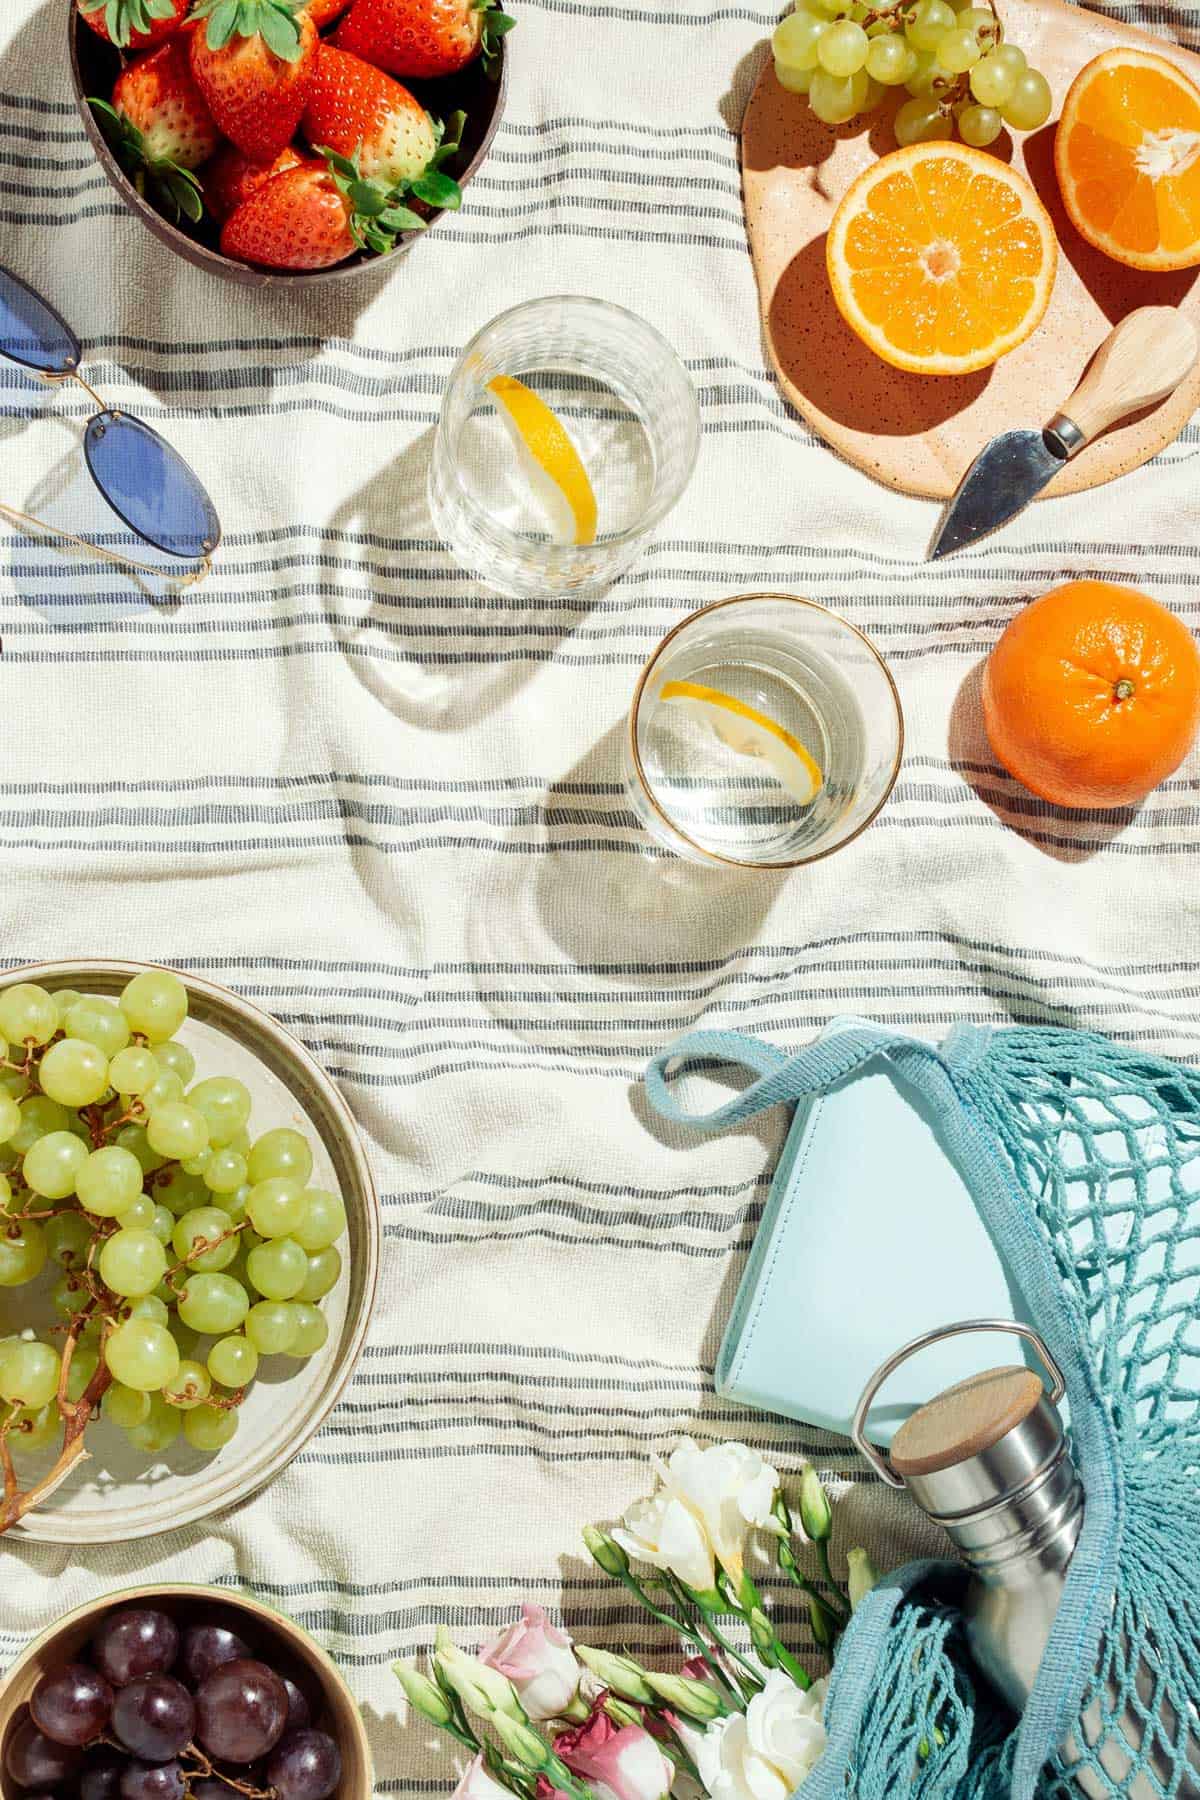 A picnic blanket with bowls of strawberries, grapes, oranges, sunglasses, two glasses of lemon water, a blue bag, flowers, and a journal.